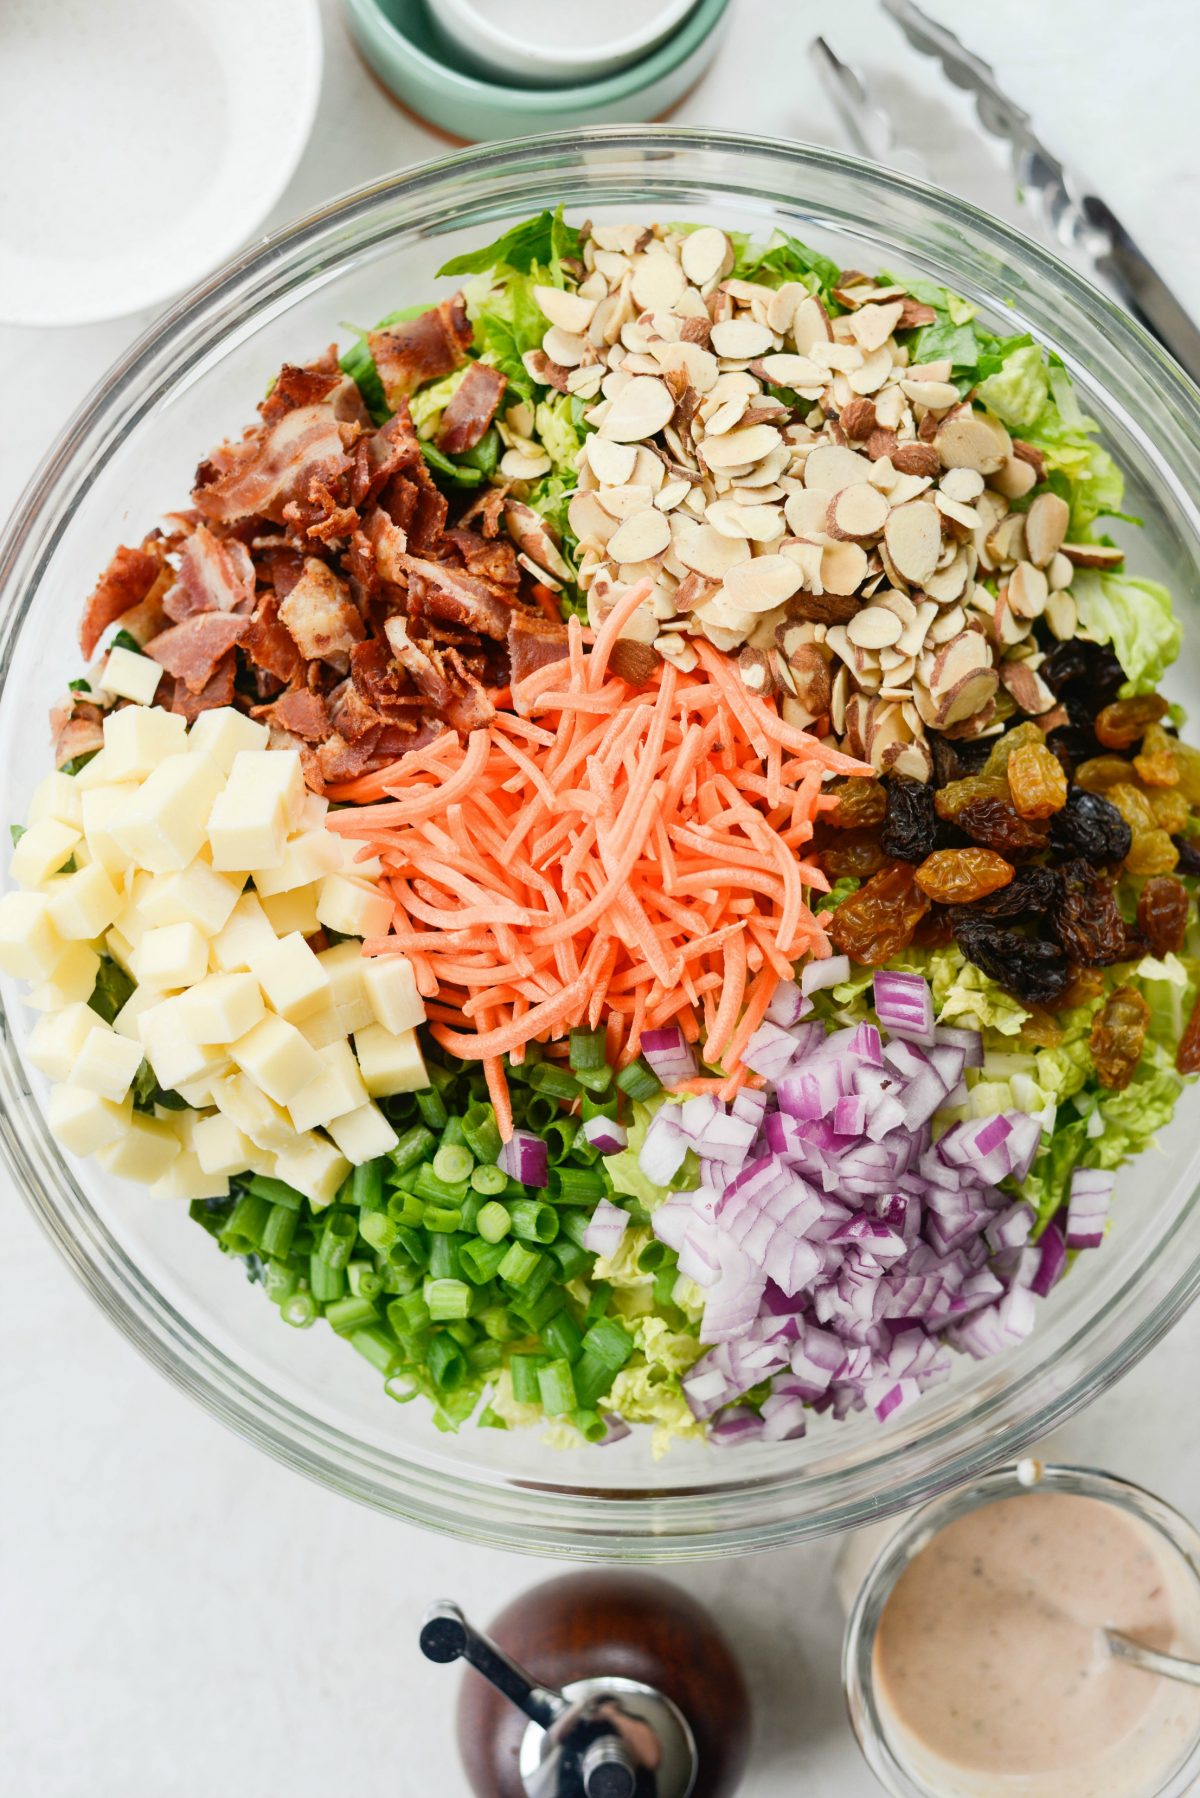 Chopped salad with sections of toppings.